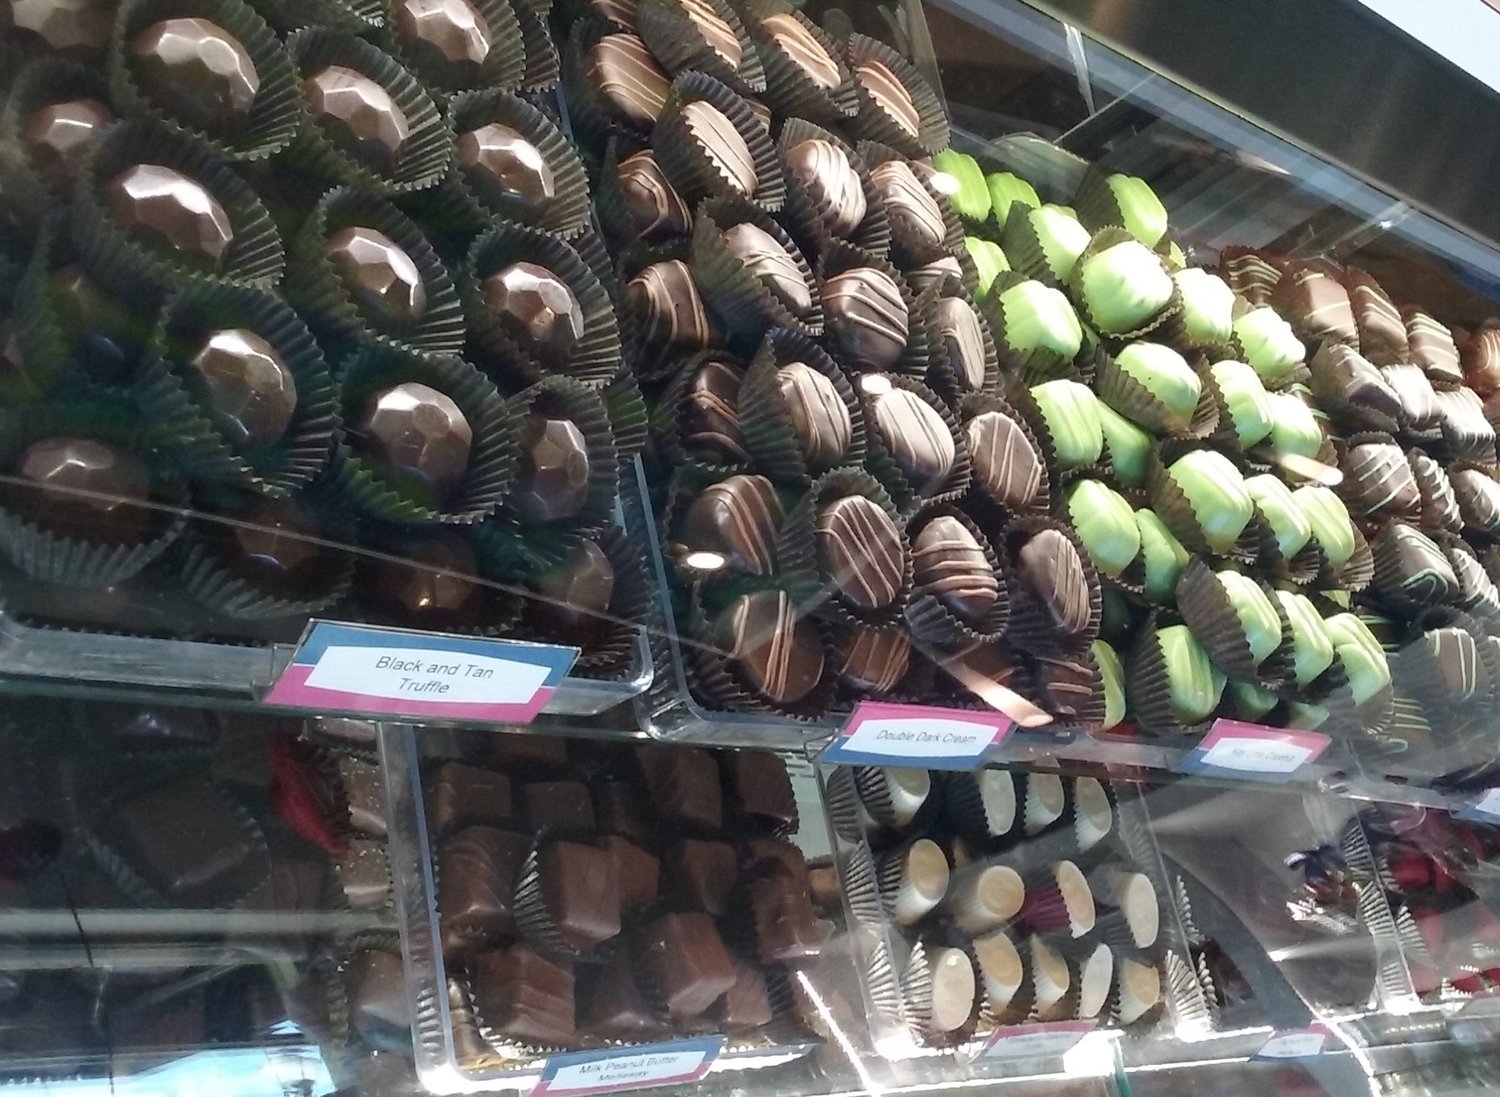 Chocolate lovers will find a variety of tasty treats at Peterbrooke Chocolatier in Sawgrass Village Shopping Center.